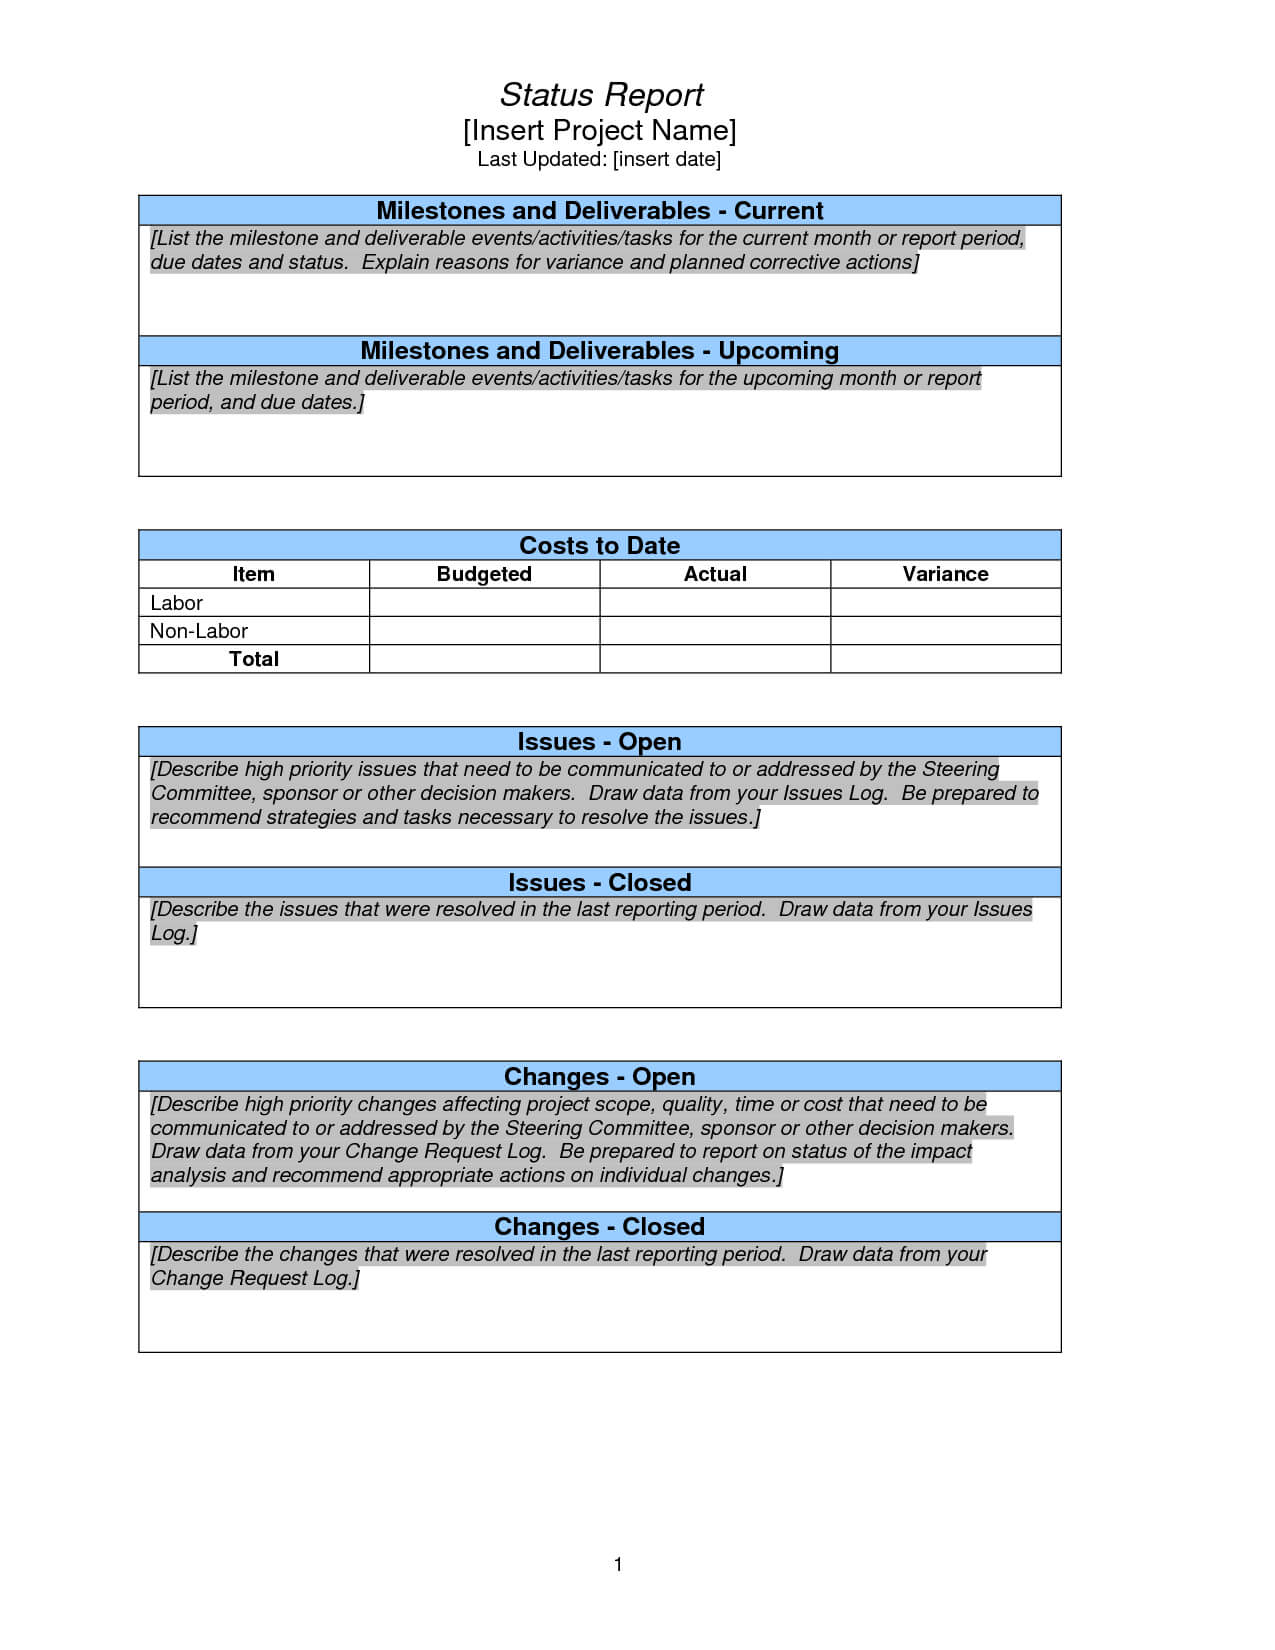 Project Status Report Sample | Project Status Report Pertaining To Data Quality Assessment Report Template